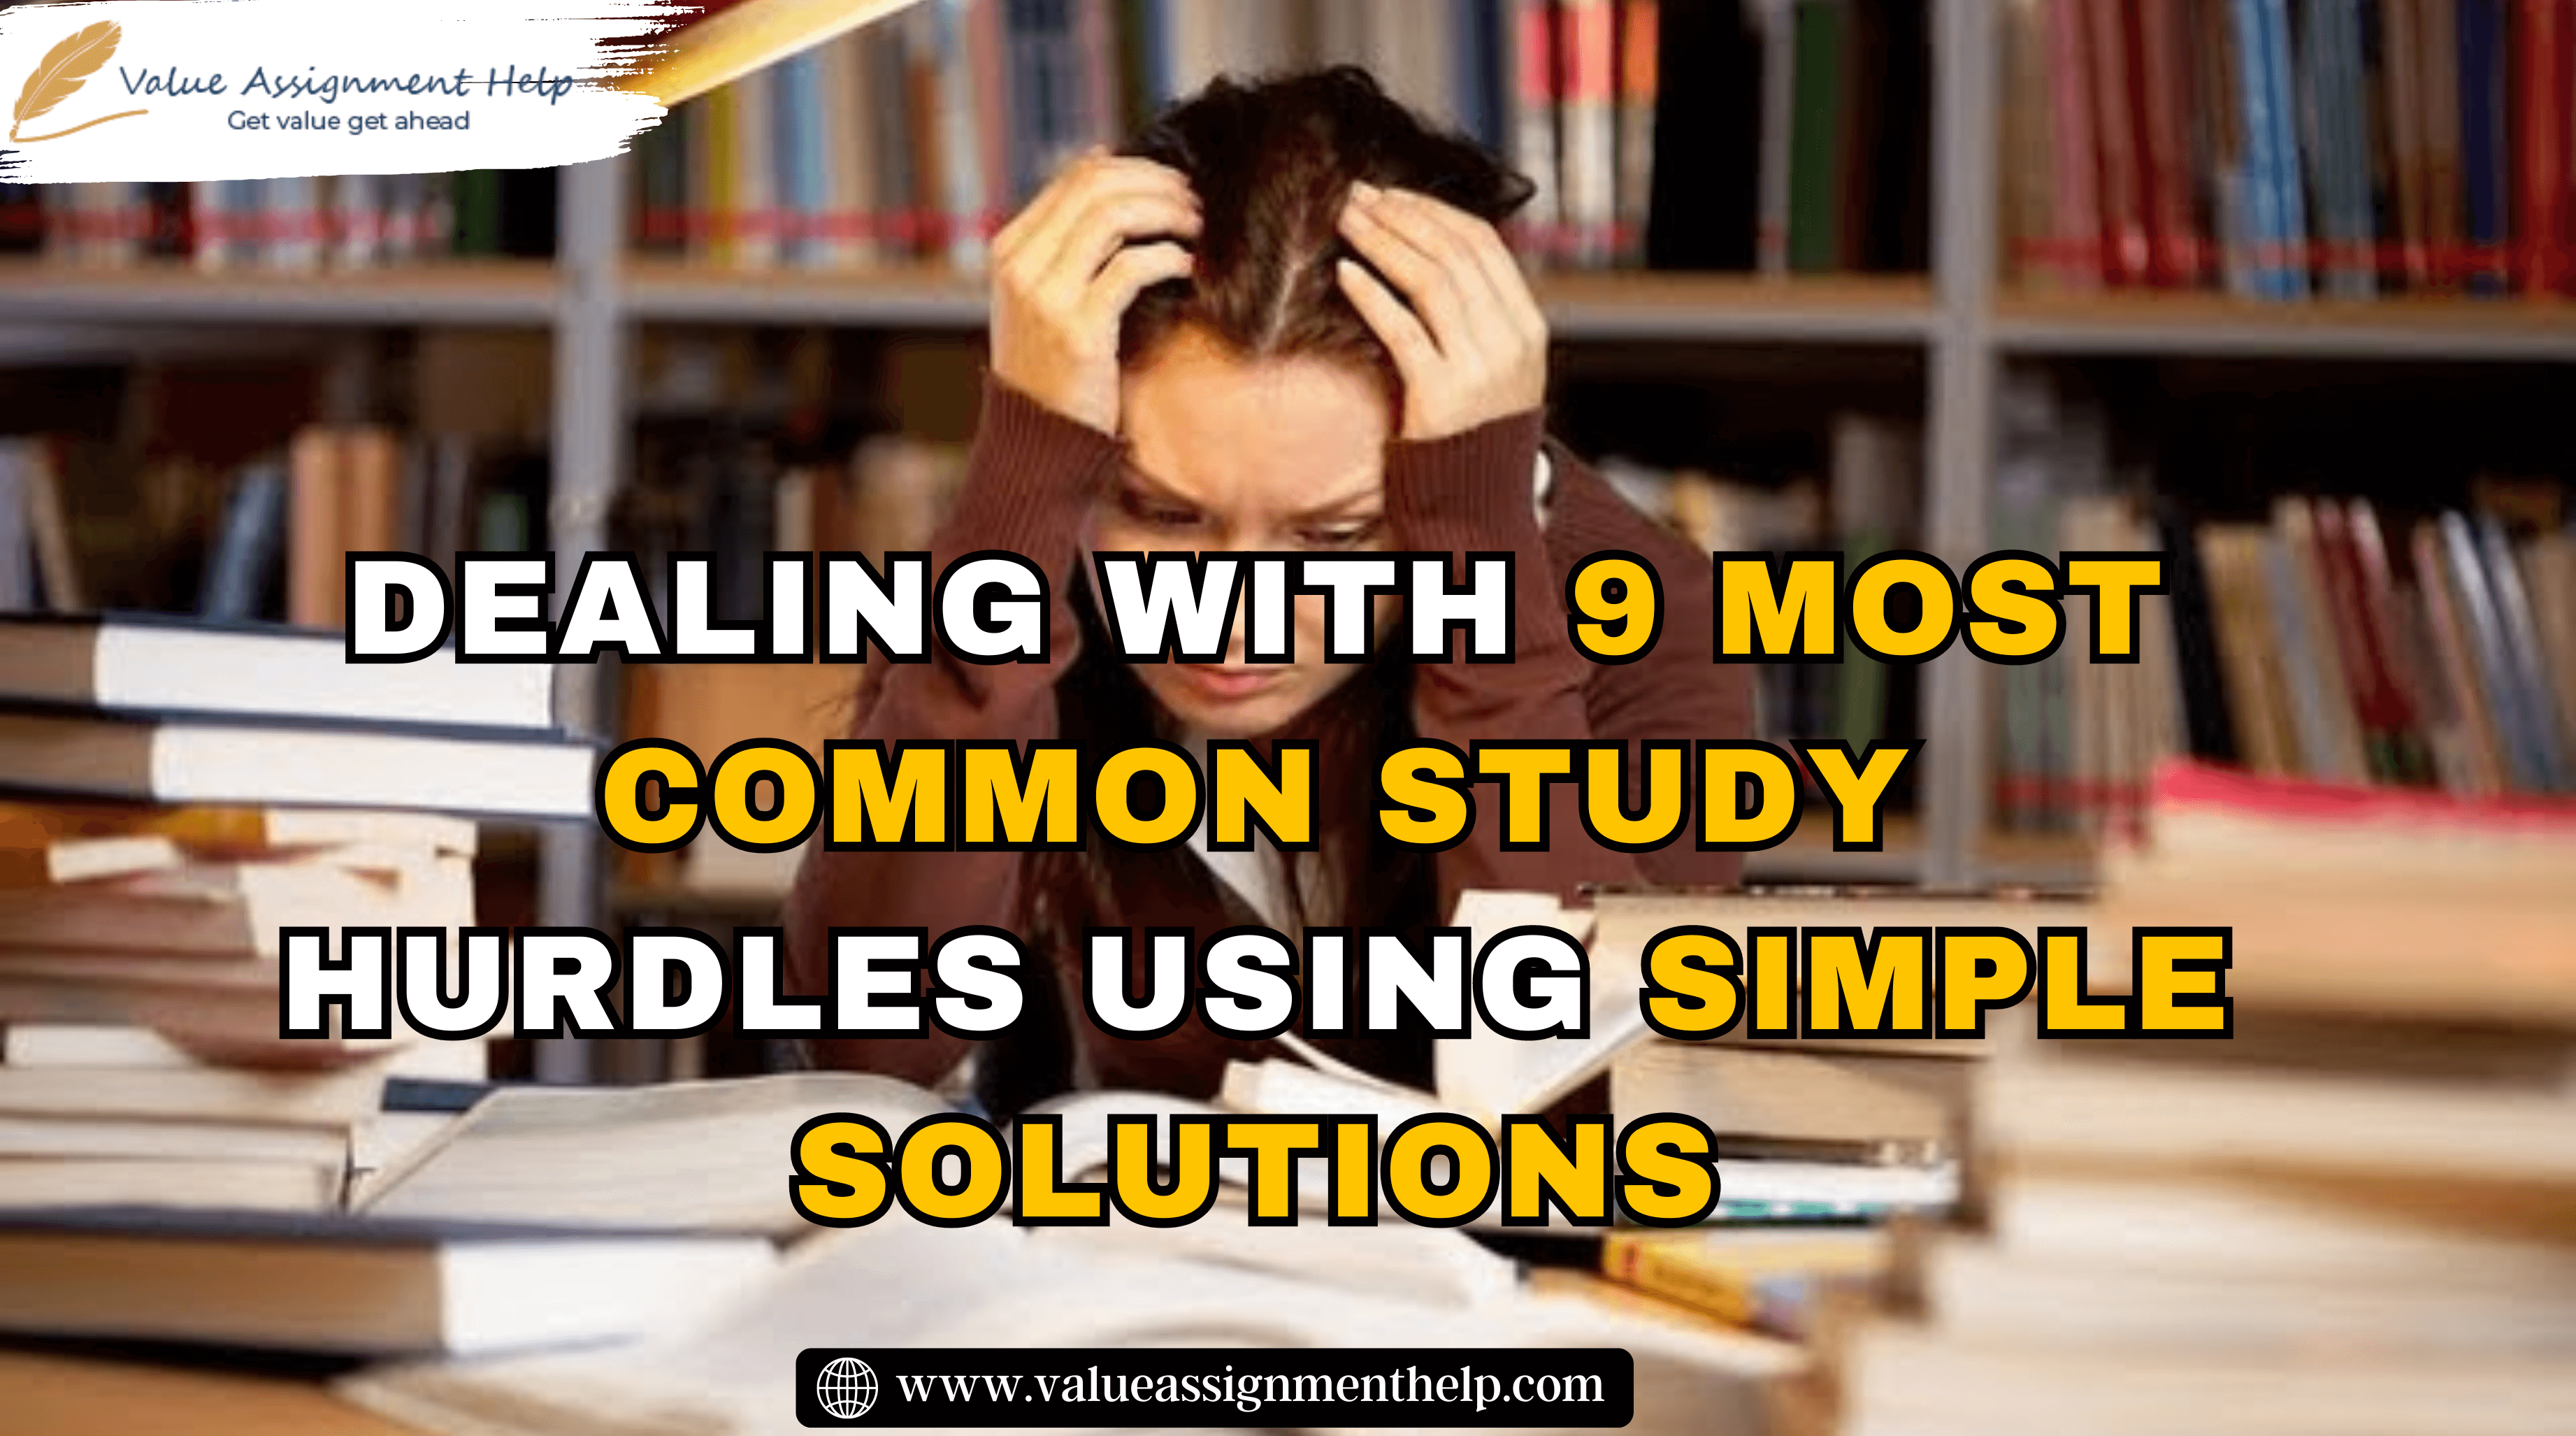  Dealing With 9 Most Common Study Hurdles Using Simple Solutions